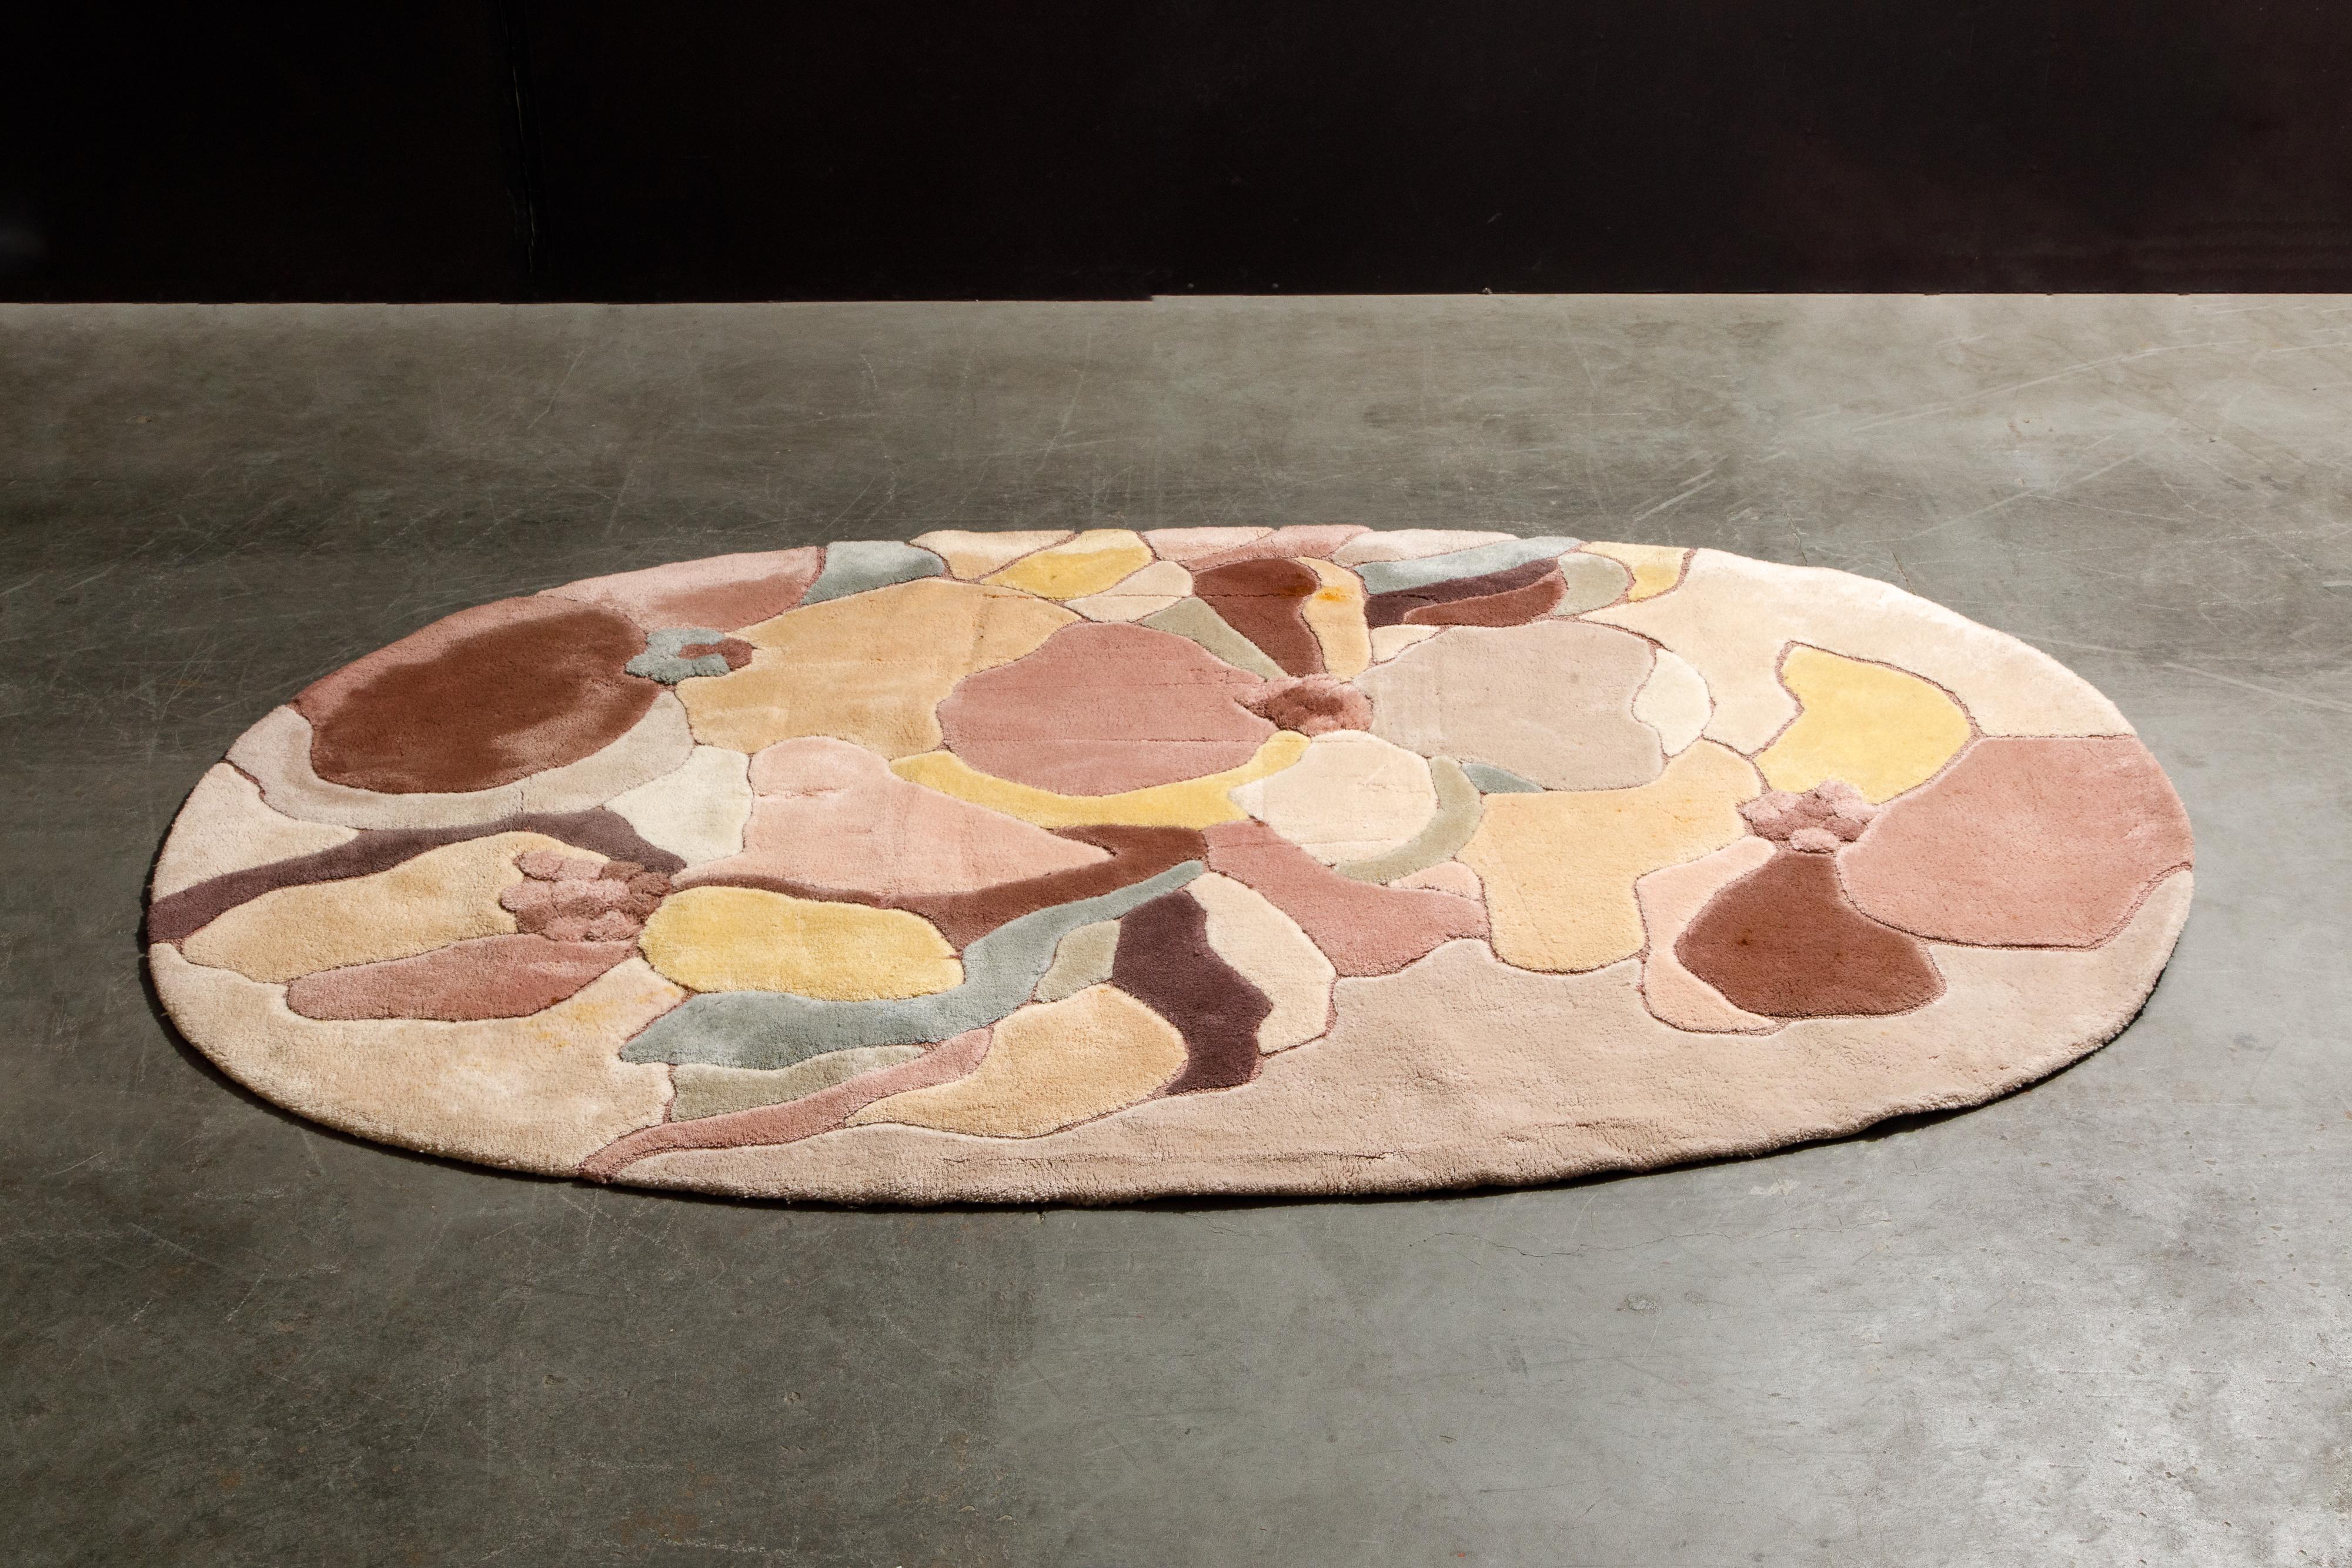 This Post-Modern oval rug by Edward Fields is signed and dated 1984 and made from 100% virgin wool. Featuring abstract shaped of different shades of pink and peach, and measures 109.5